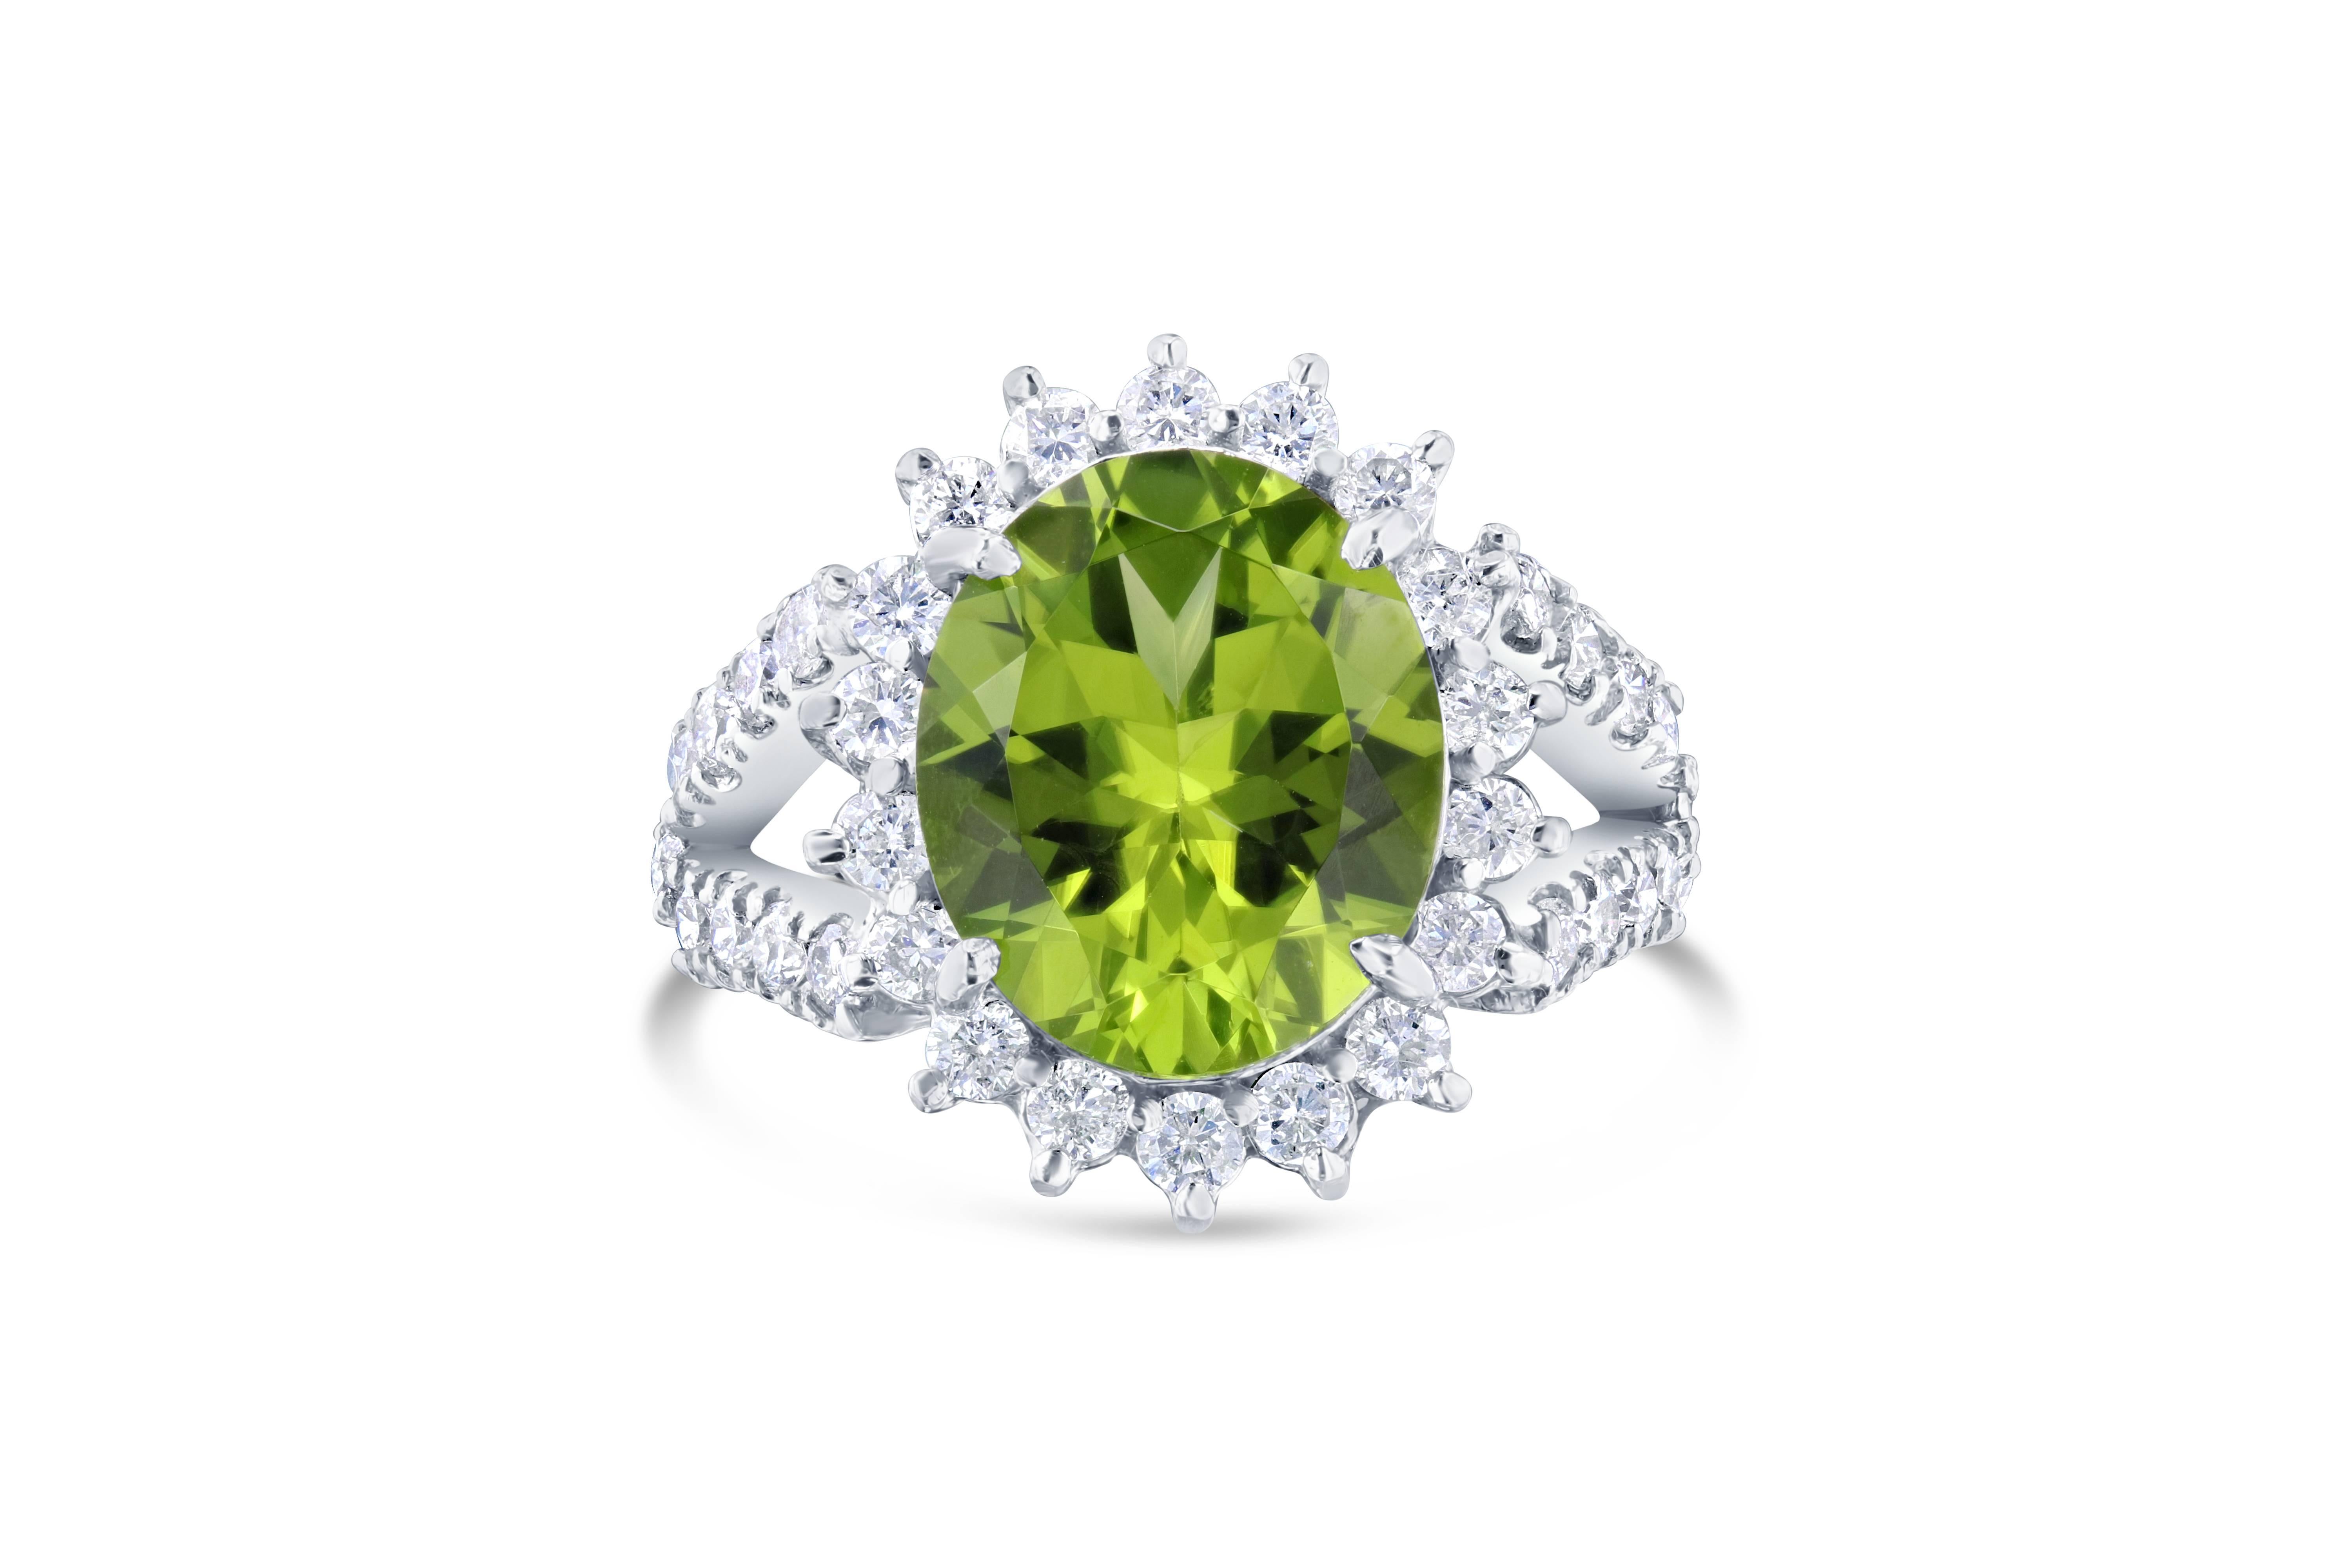 This ring is a classic Ballerina Style and has large Oval Cut Peridot in the center of the ring that weighs 4.48 carats.  The ring is surrounded by 36 Round Cut Diamonds that weigh 0.98 carat.  The ring is casted in 14K White Gold and weighs